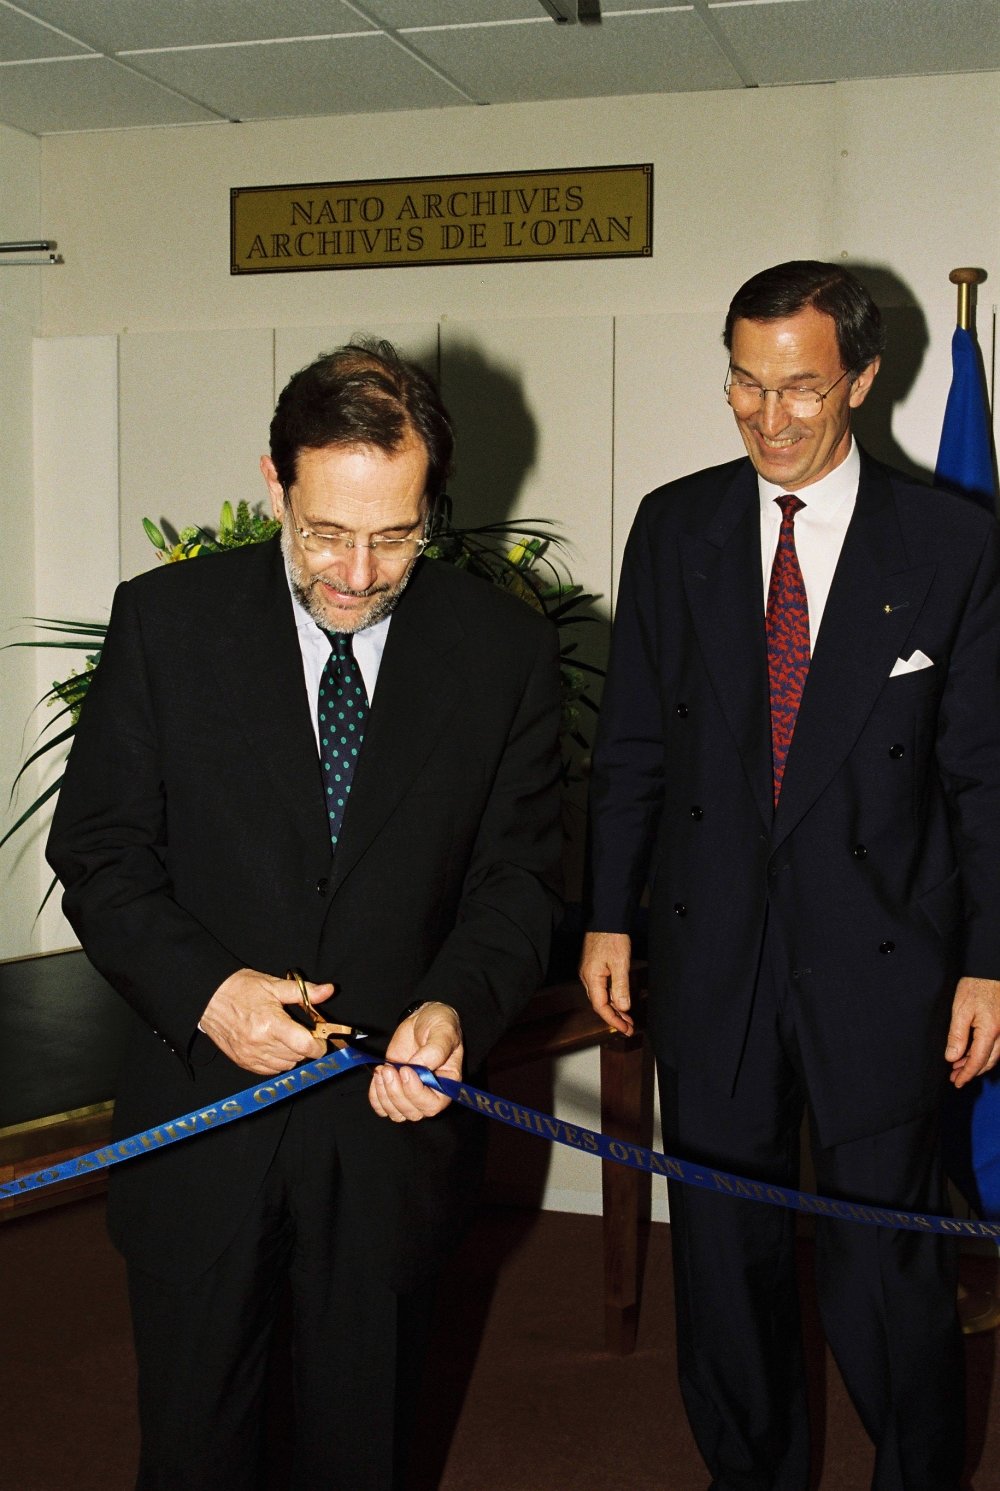 Opening of the NATO Archives